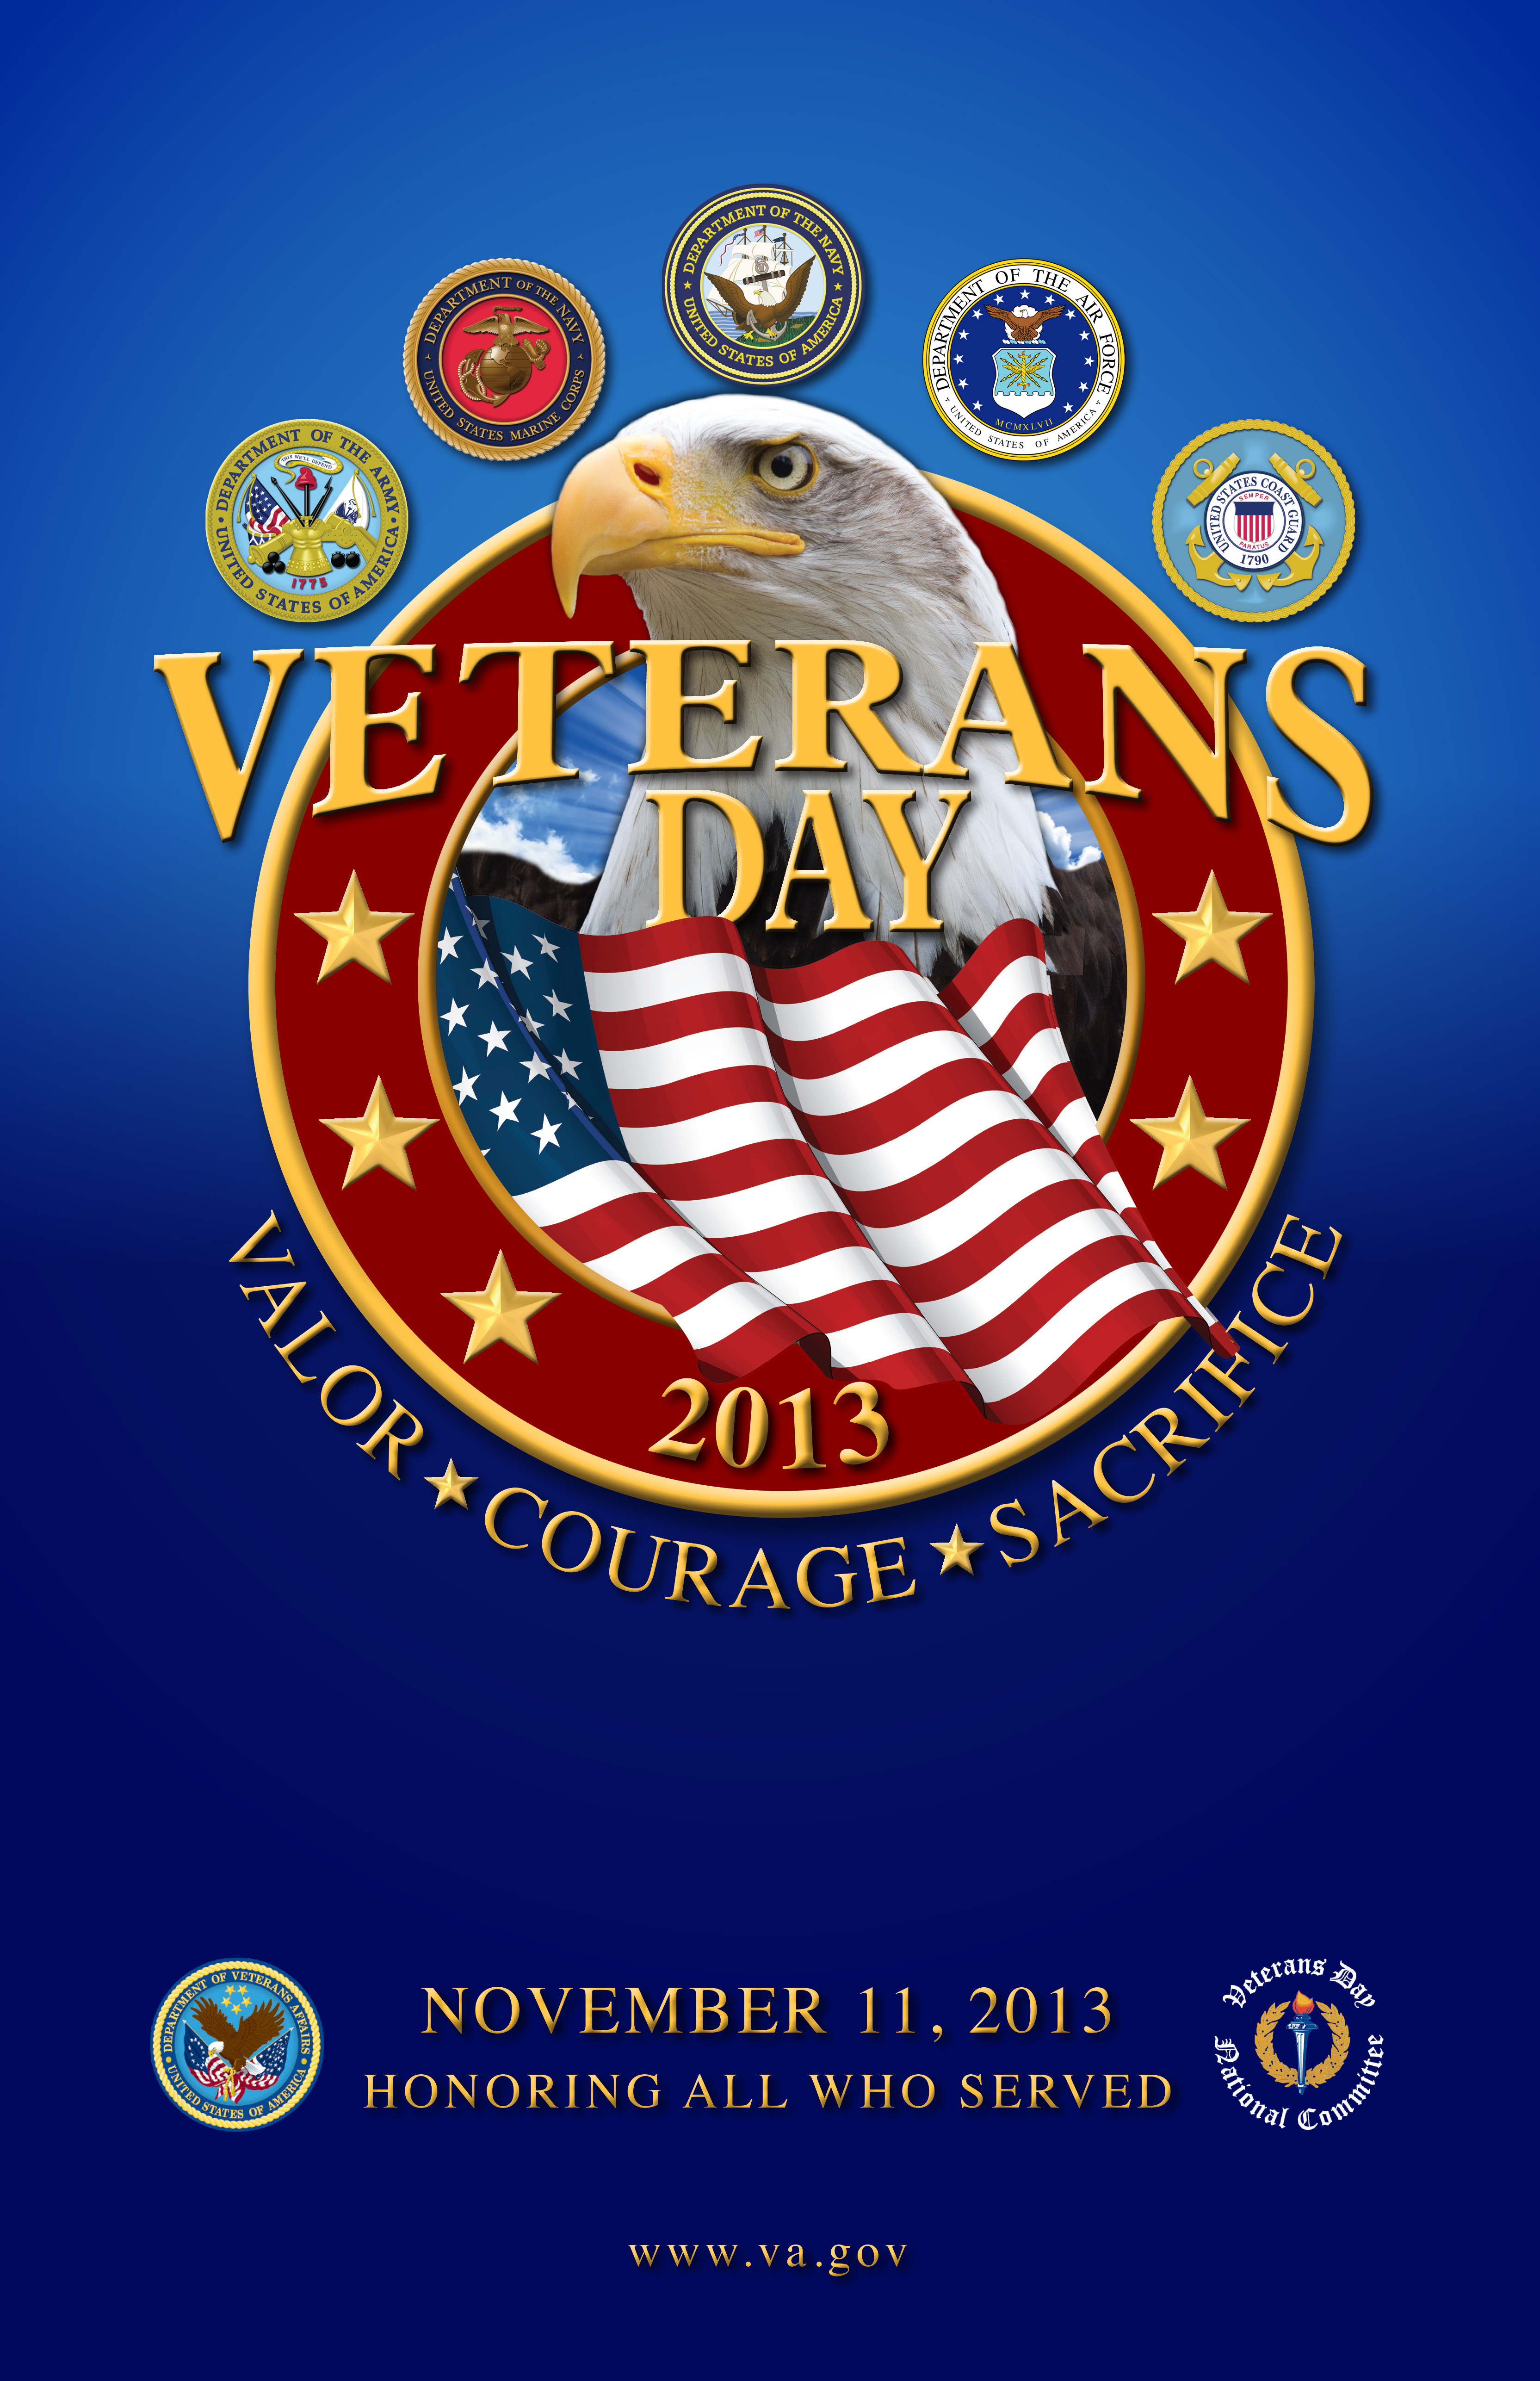 Veterans Day Poster Gallery Veterans Day Posters From 1978 Thru 2014